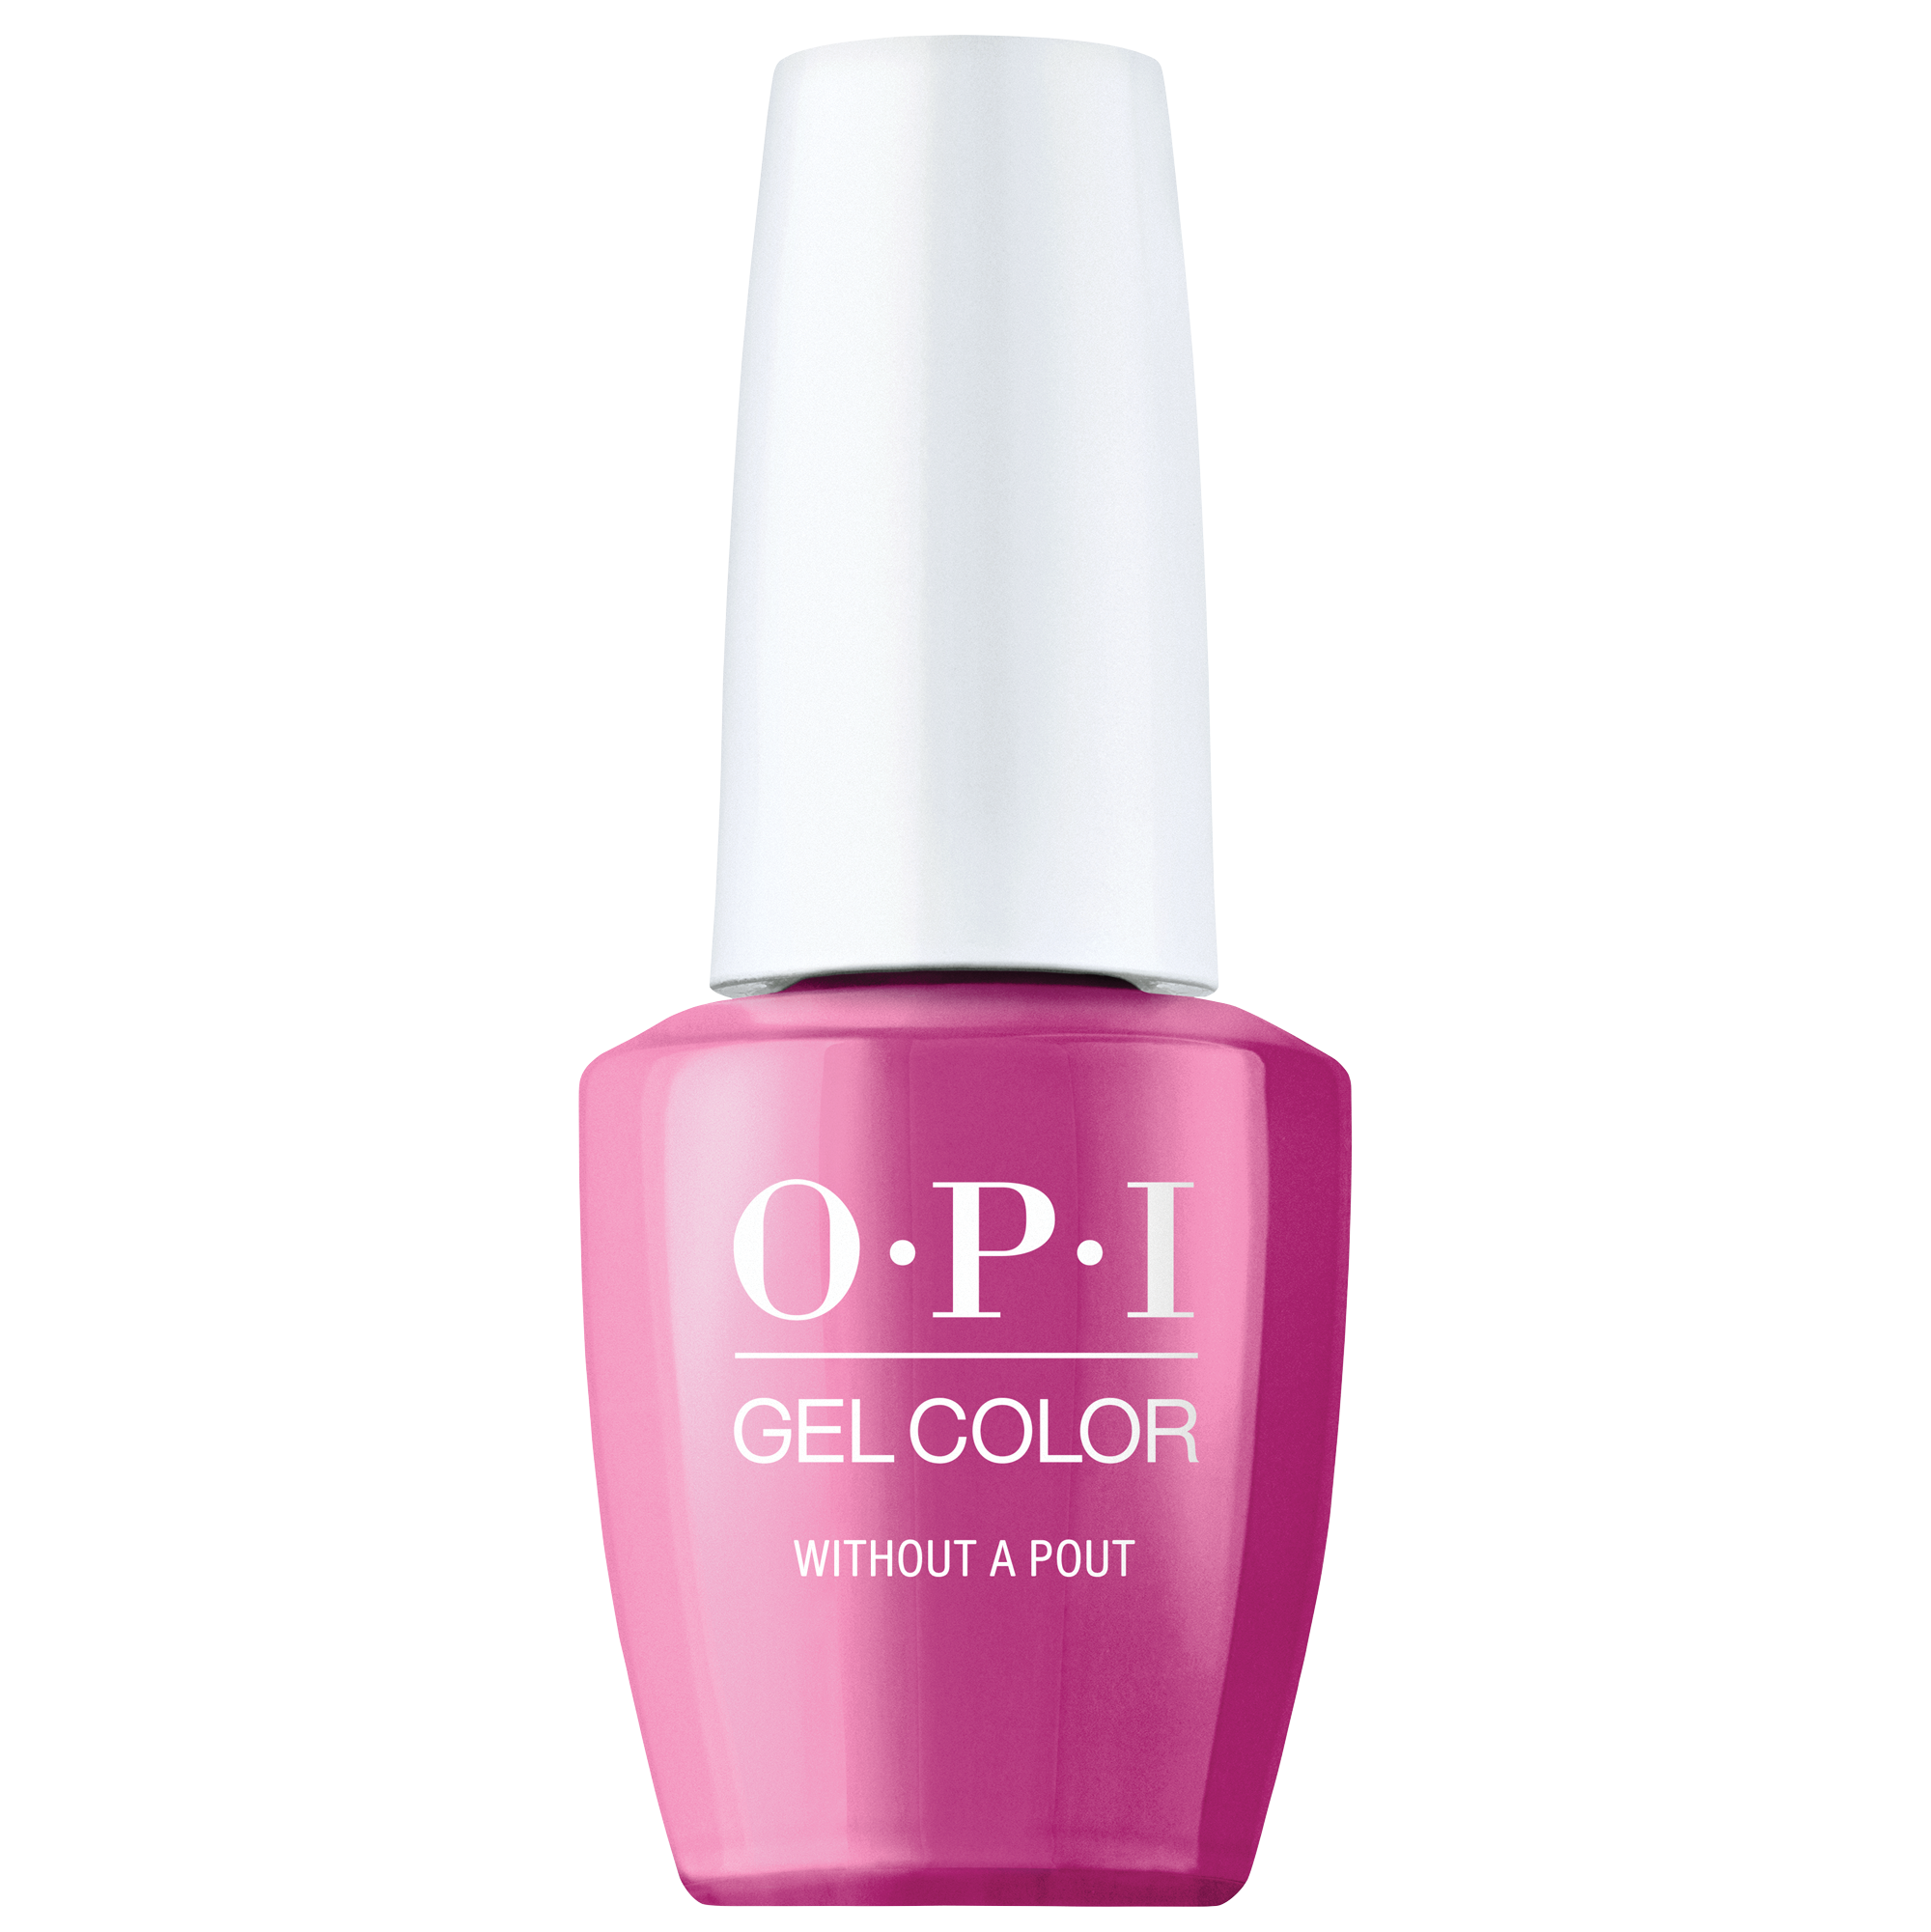 OPI Gel Color 360 - Without a Pout